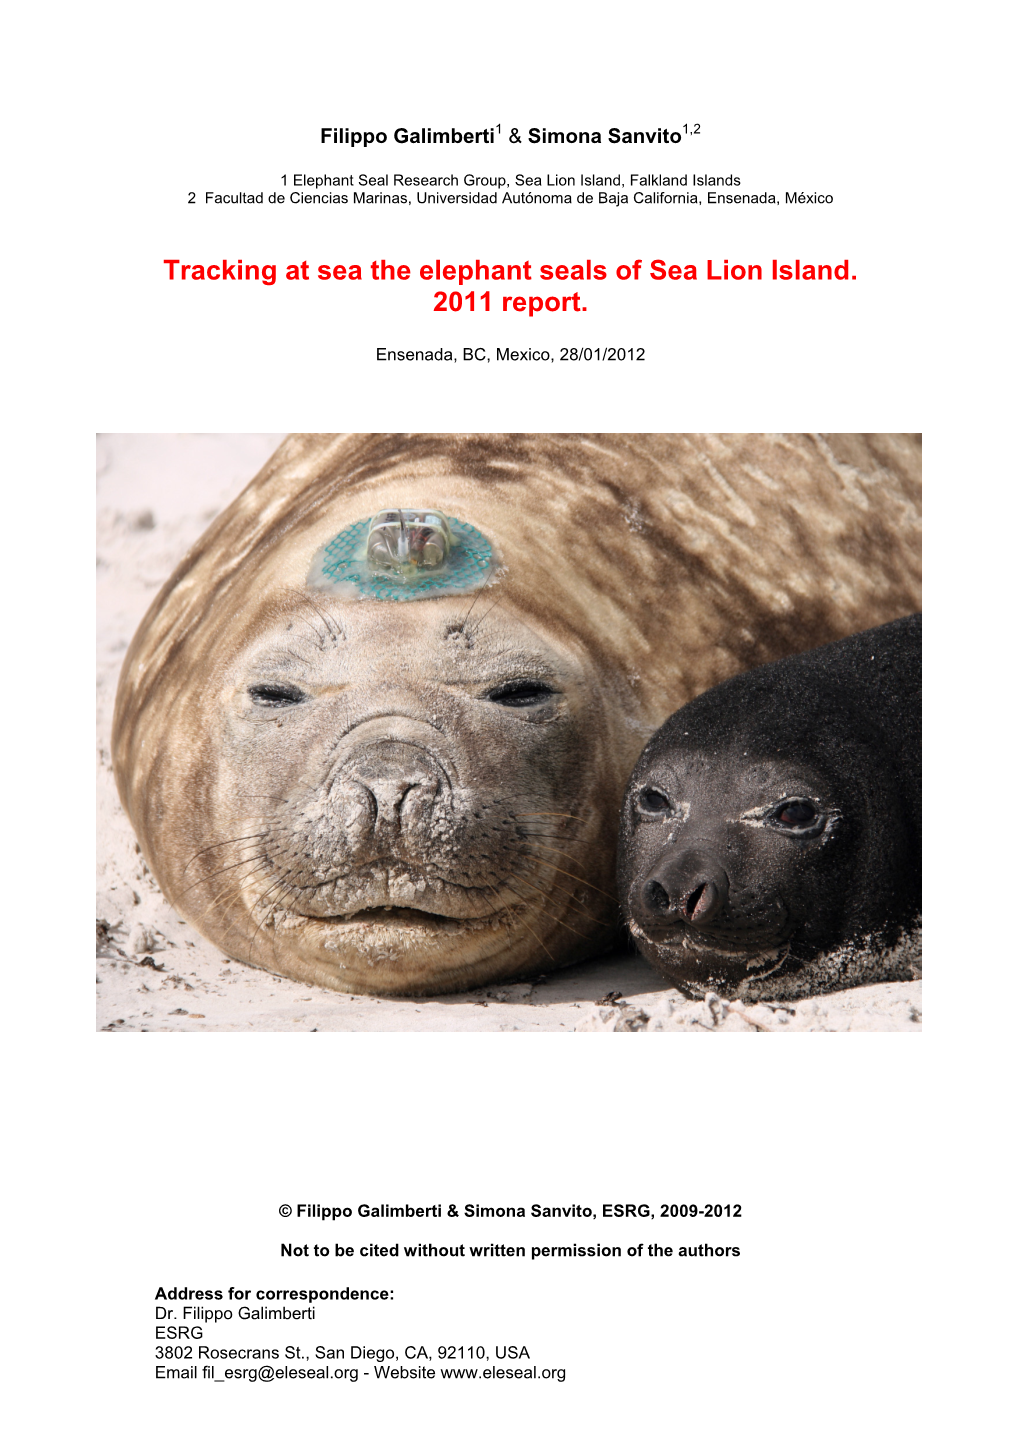 Deployment of Satellite Tags on Elephant Seals of Sea Lion Island